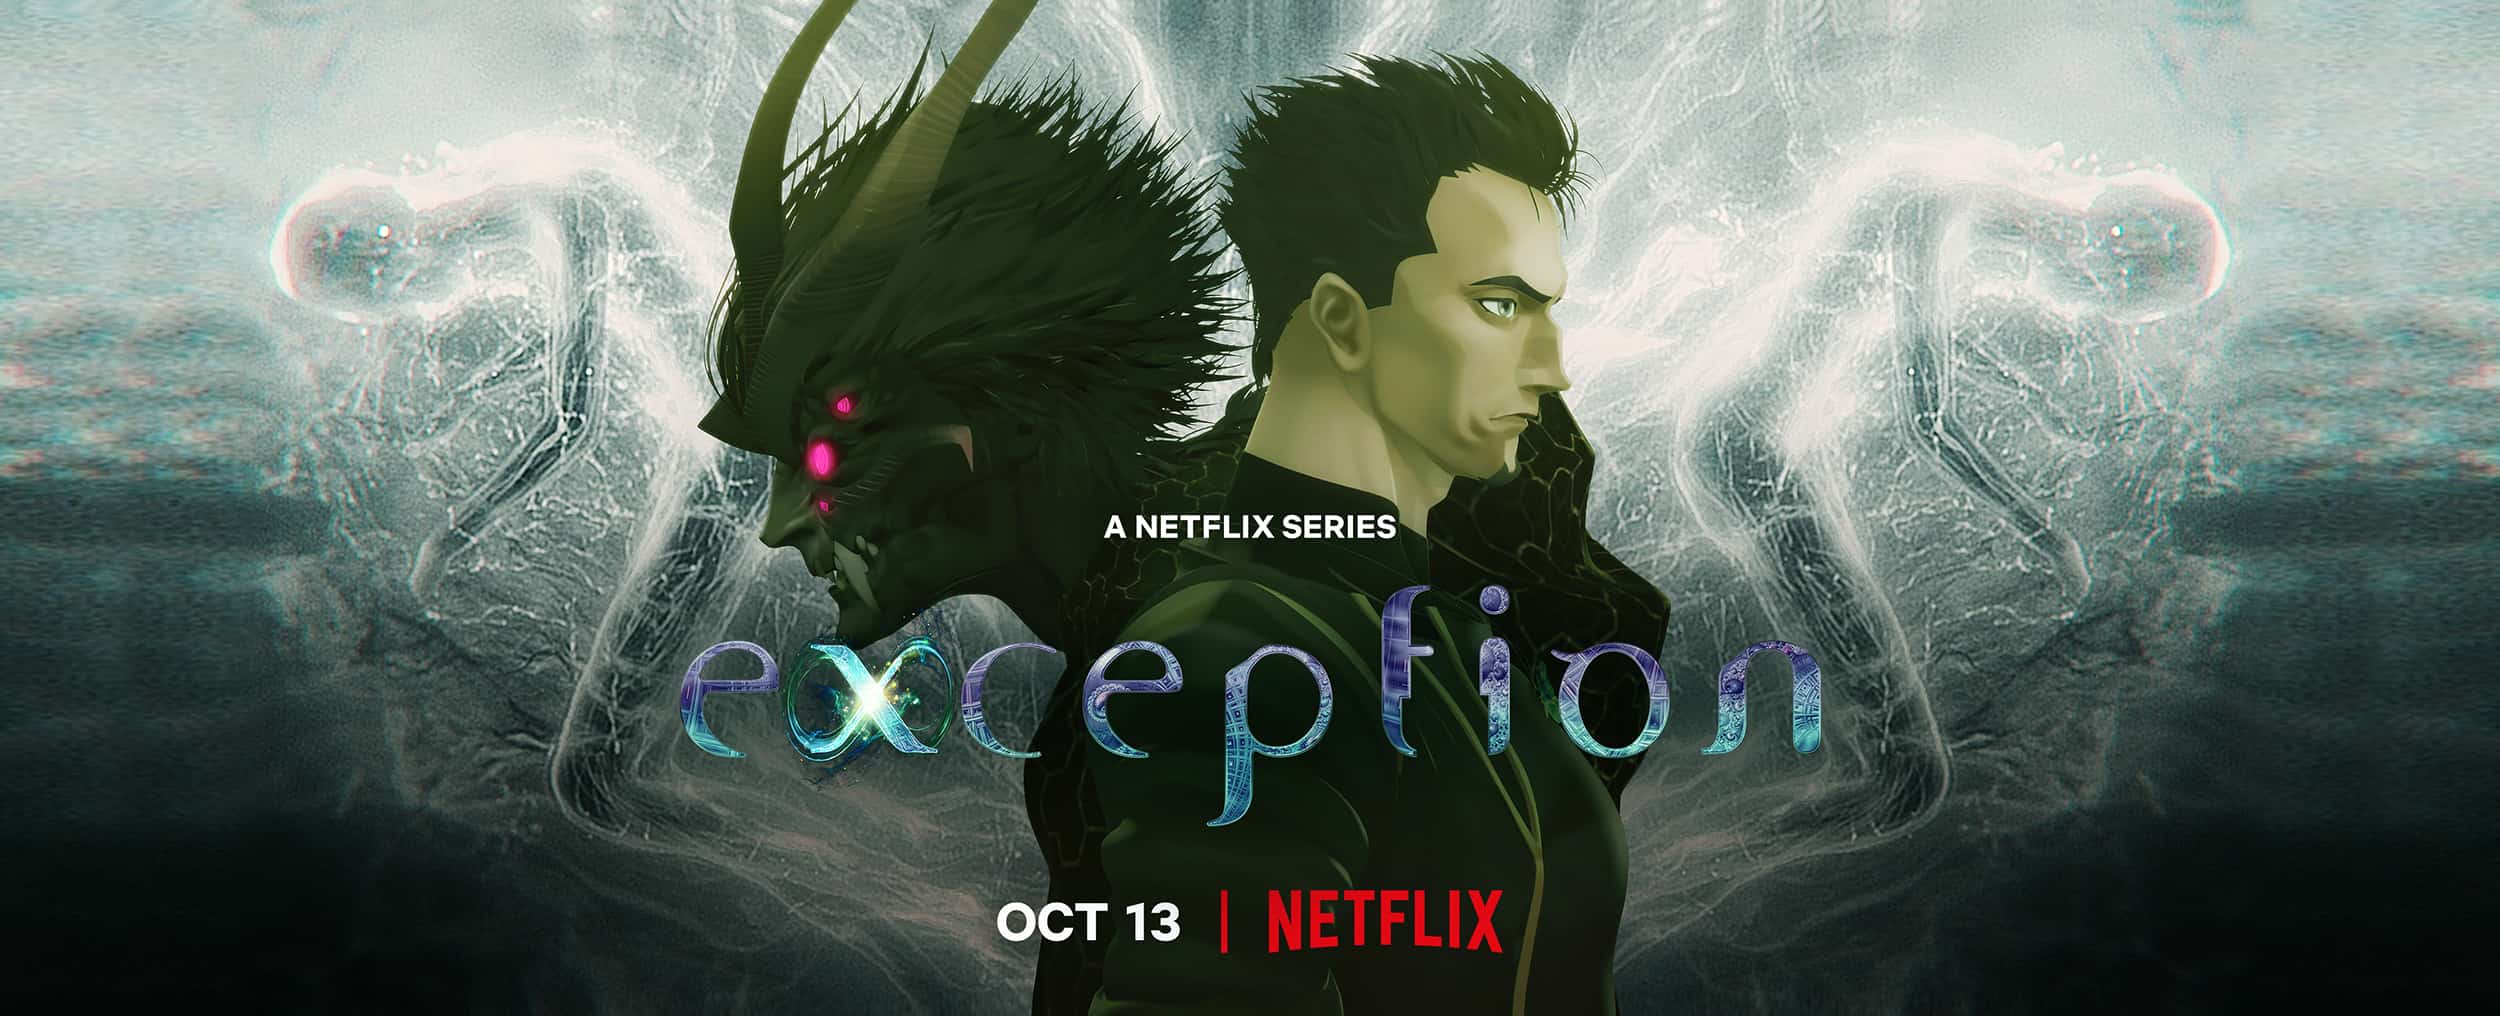 Exception hd poster